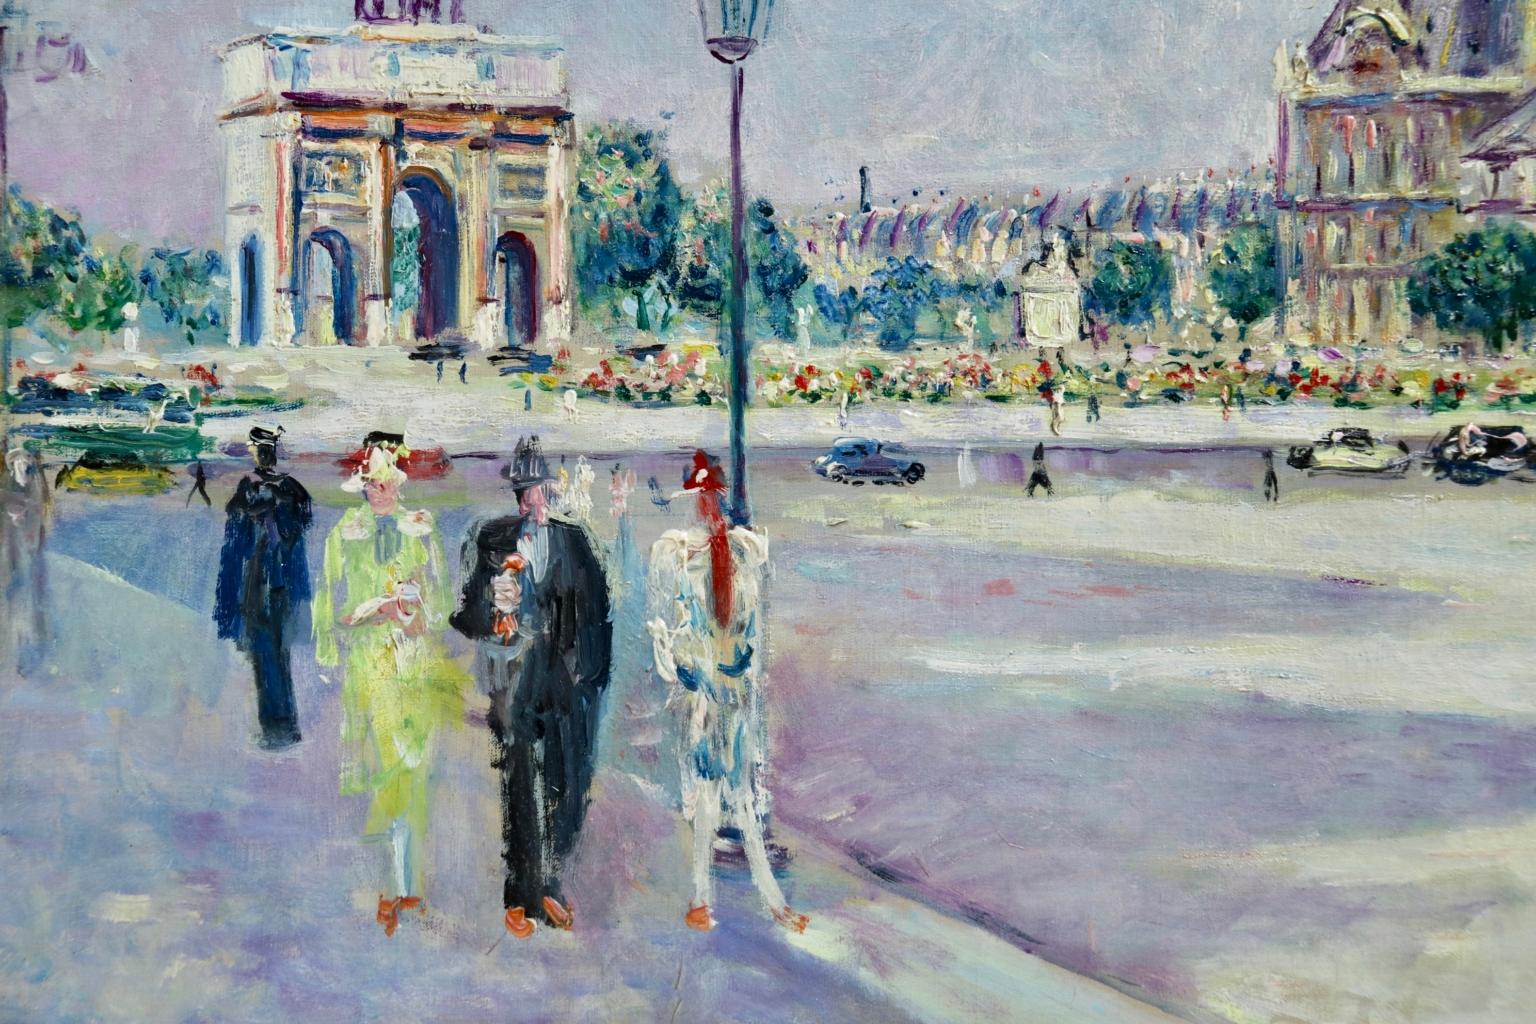 Carrousel du Louvre - Post Impressionist Oil, Figures in Cityscape by L Adrion - Post-Impressionist Painting by Lucien Adrion